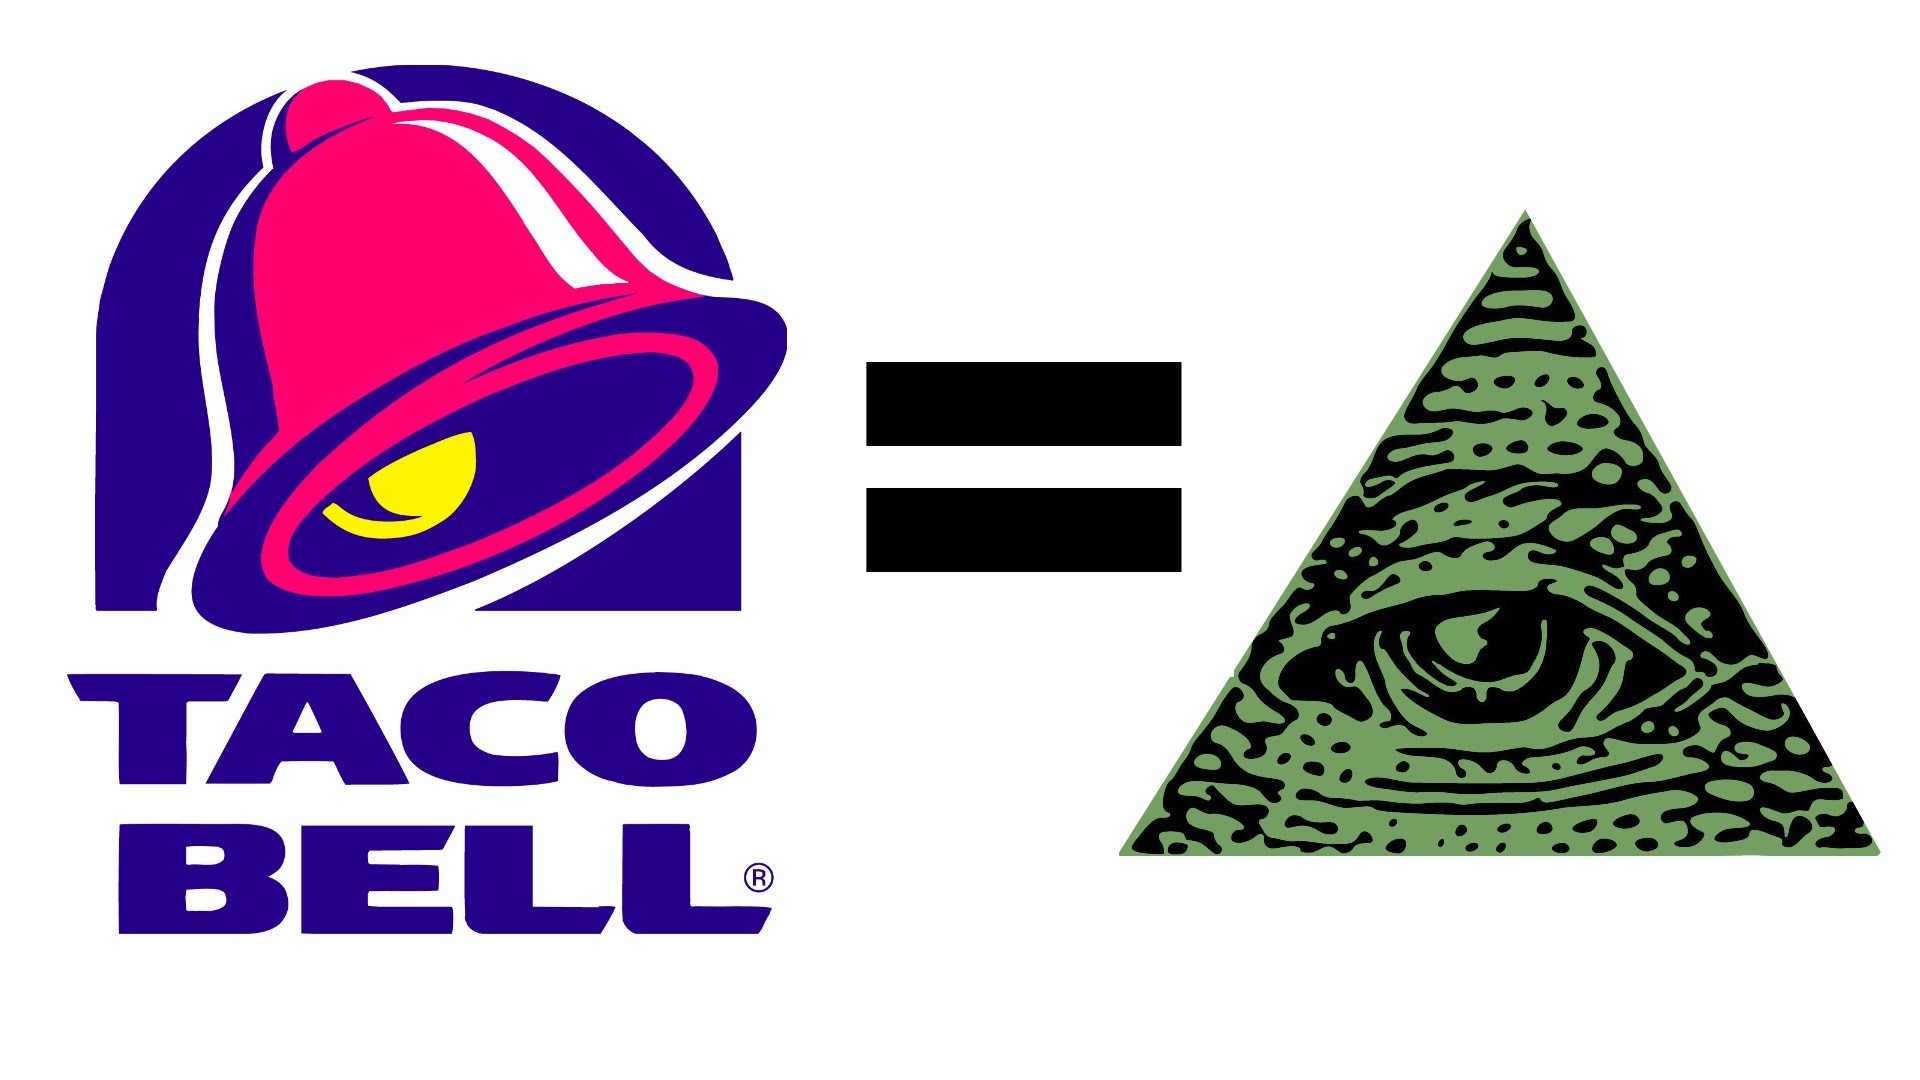 You Have Done It, Ou Just Spent $100 On Taco Bell Congrats, - Taco Bell Illuminati - HD Wallpaper 